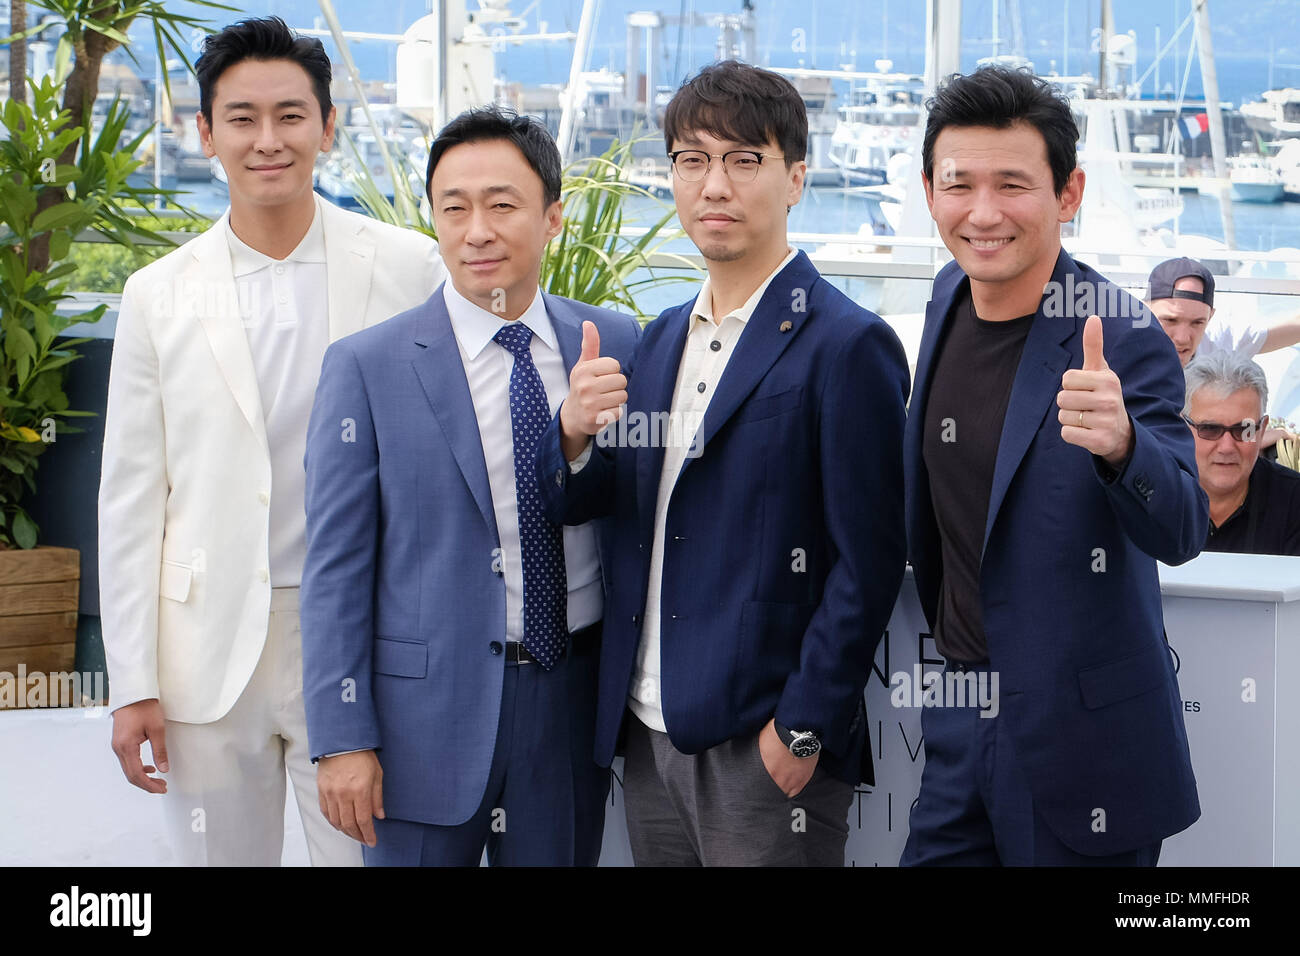 Cannes, France. 11th May, 2018. Ju Ji-hoon, Lee Sung-min, Yoon Jong-bin and Hwang Jung-min at 'The Spy Gone North' photocall on Friday 11 May 2018 as part of the 71st Cannes Film Festival held at Palais des Festivals, Cannes. Pictured: Ju Ji-hoon, Lee Sung-min, Yoon Jong-bin , Hwang Jung-min. Picture by Julie Edwards. Credit: Julie Edwards/Alamy Live News Stock Photo